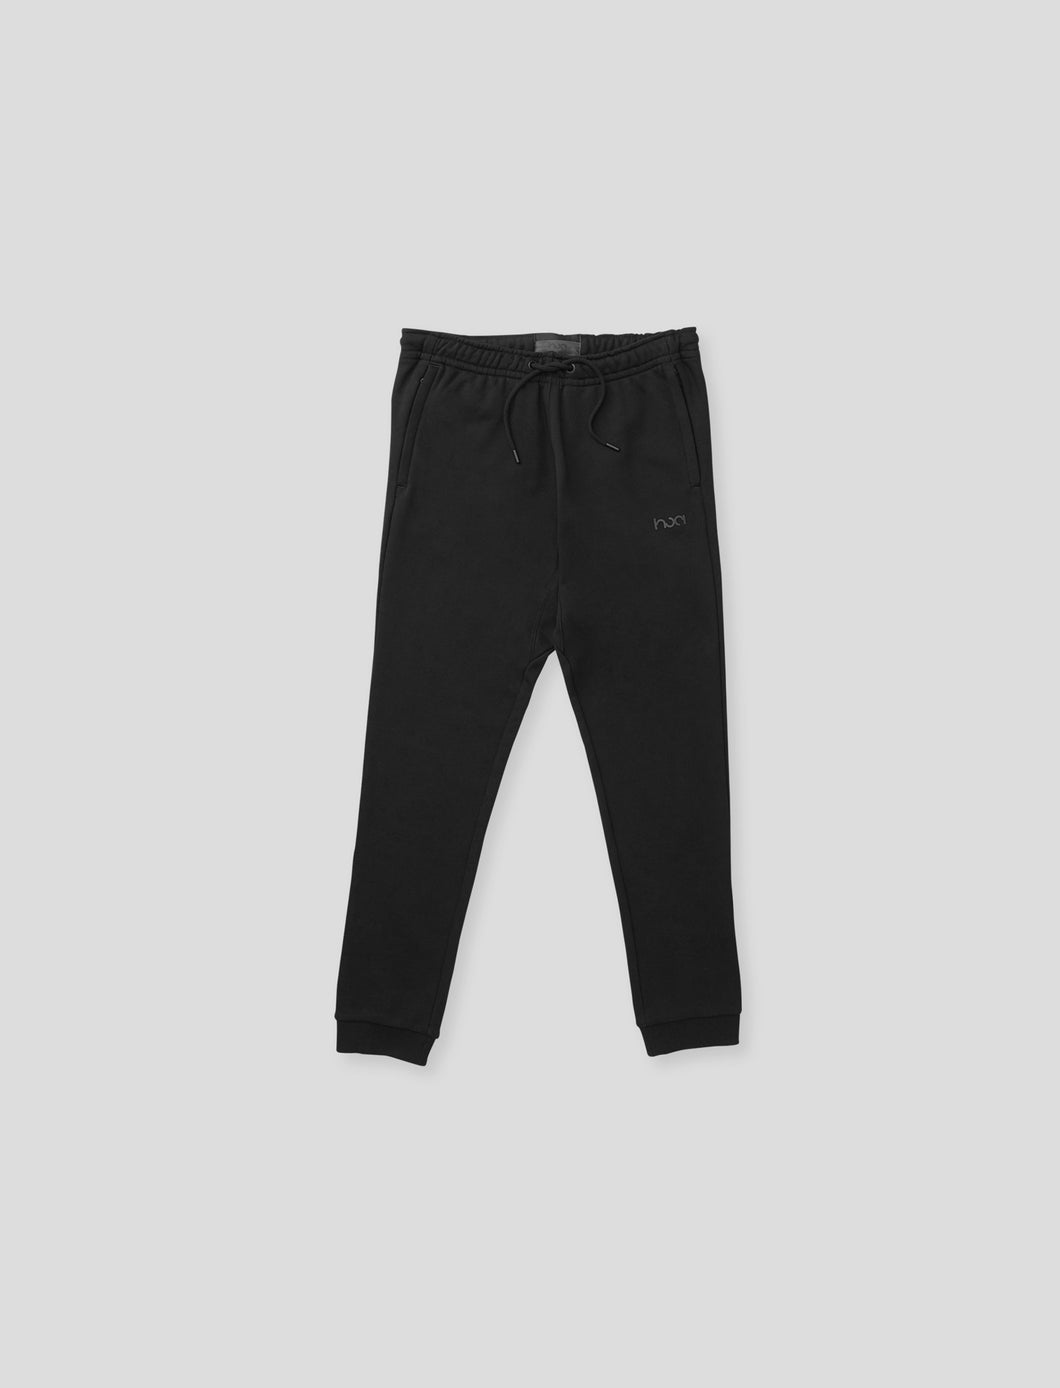 Men's French Terry Jogger Black